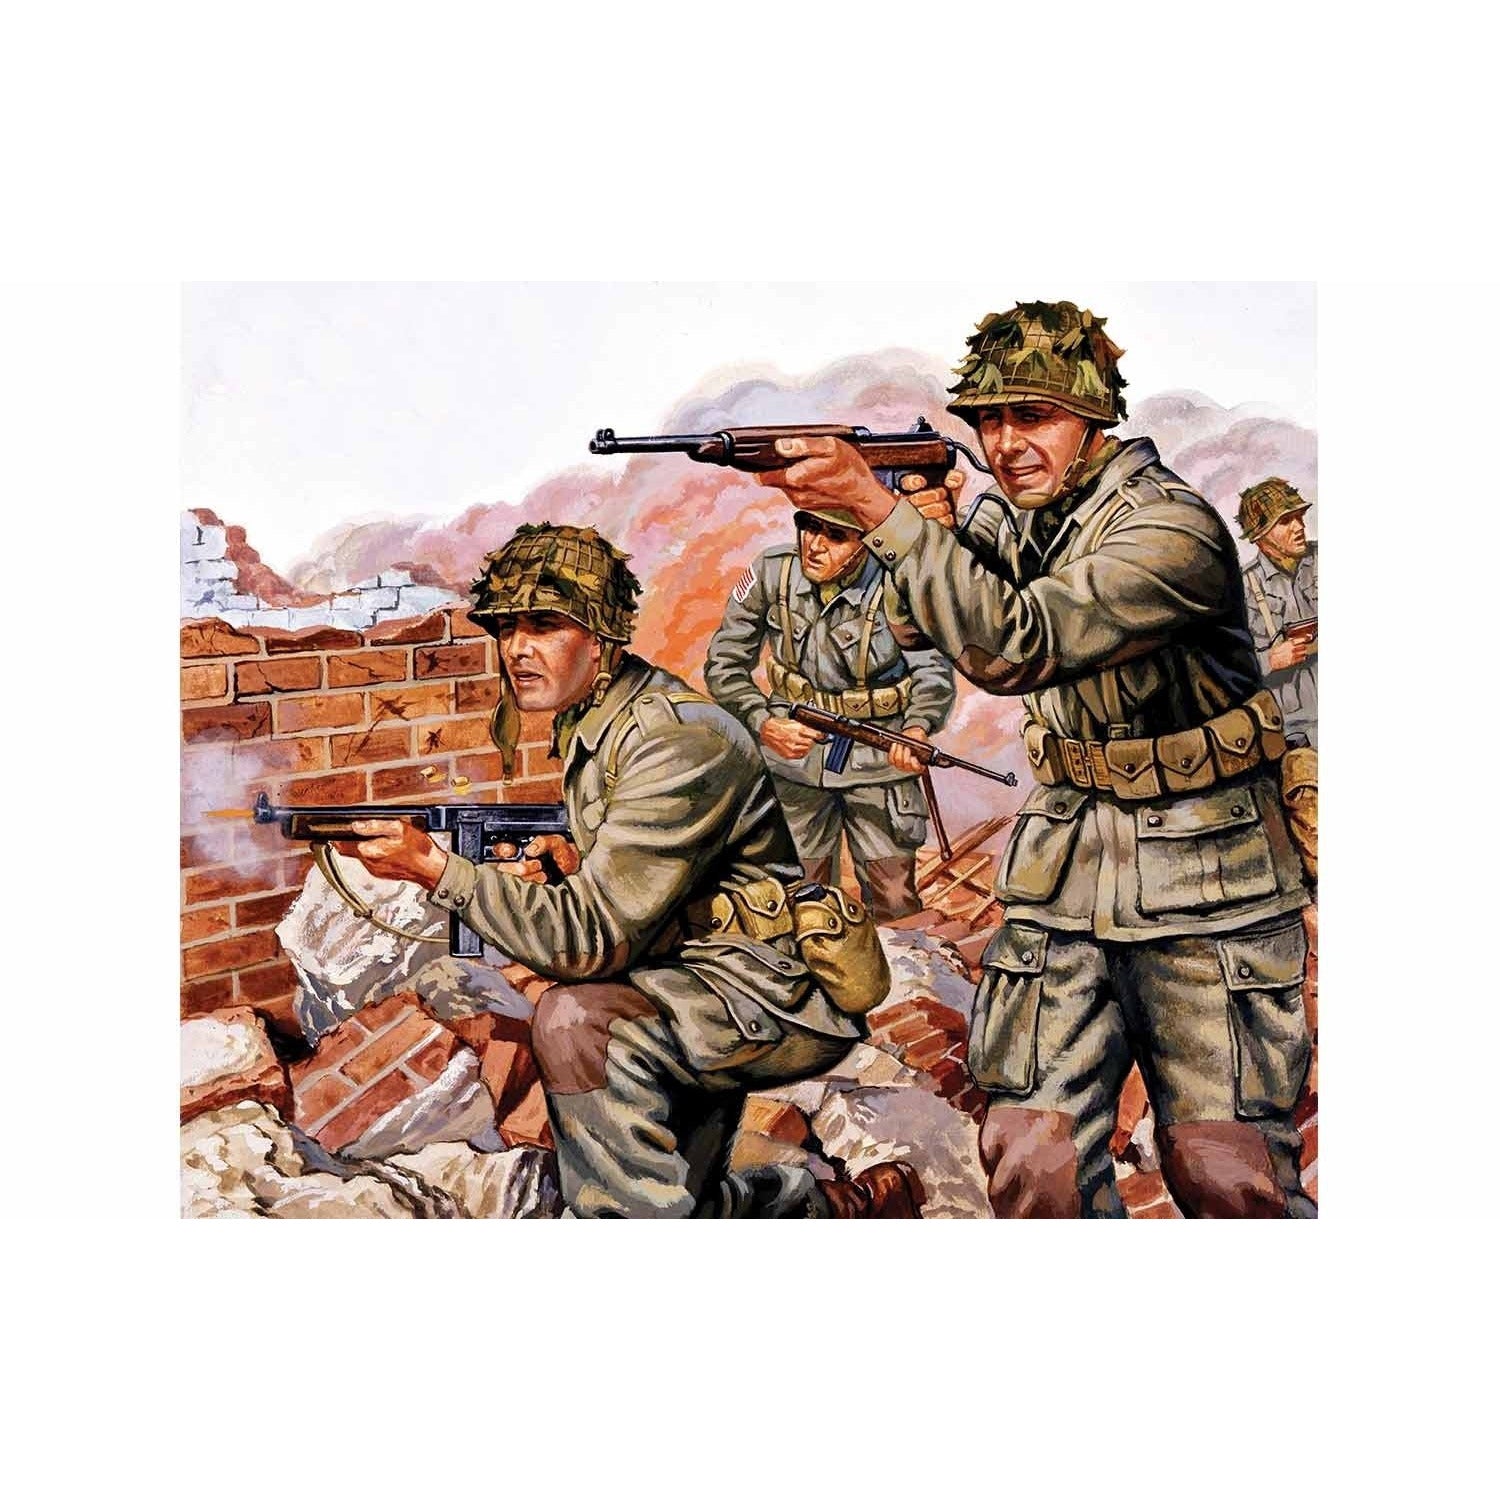 US Paratroopers WWII 1/72 #00751 by Airfix